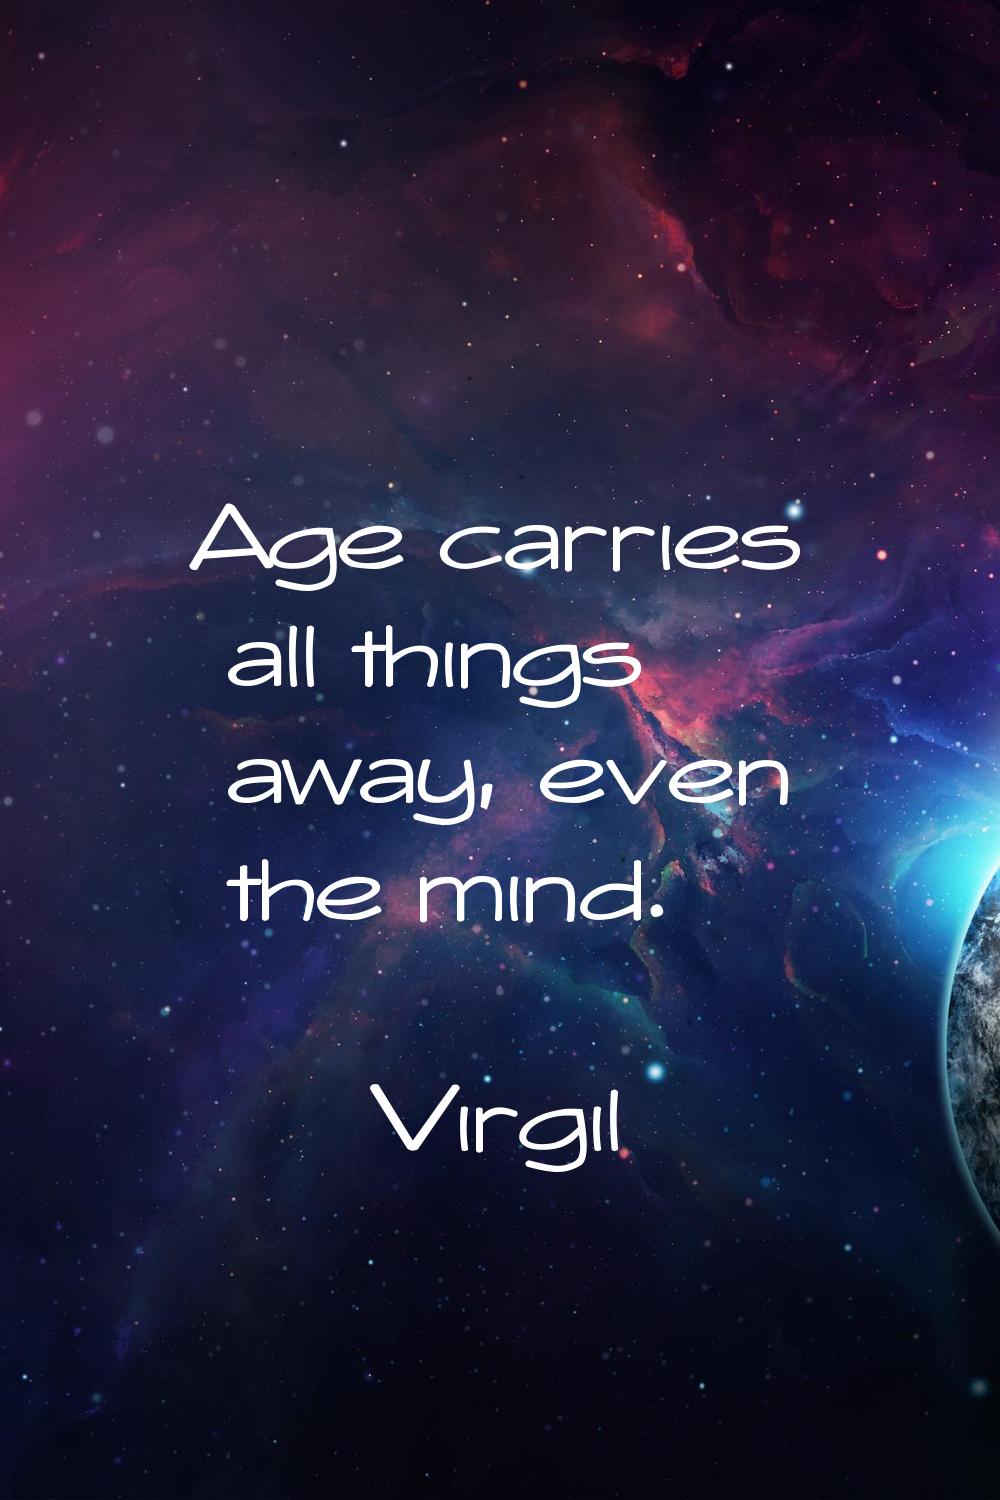 Age carries all things away, even the mind.